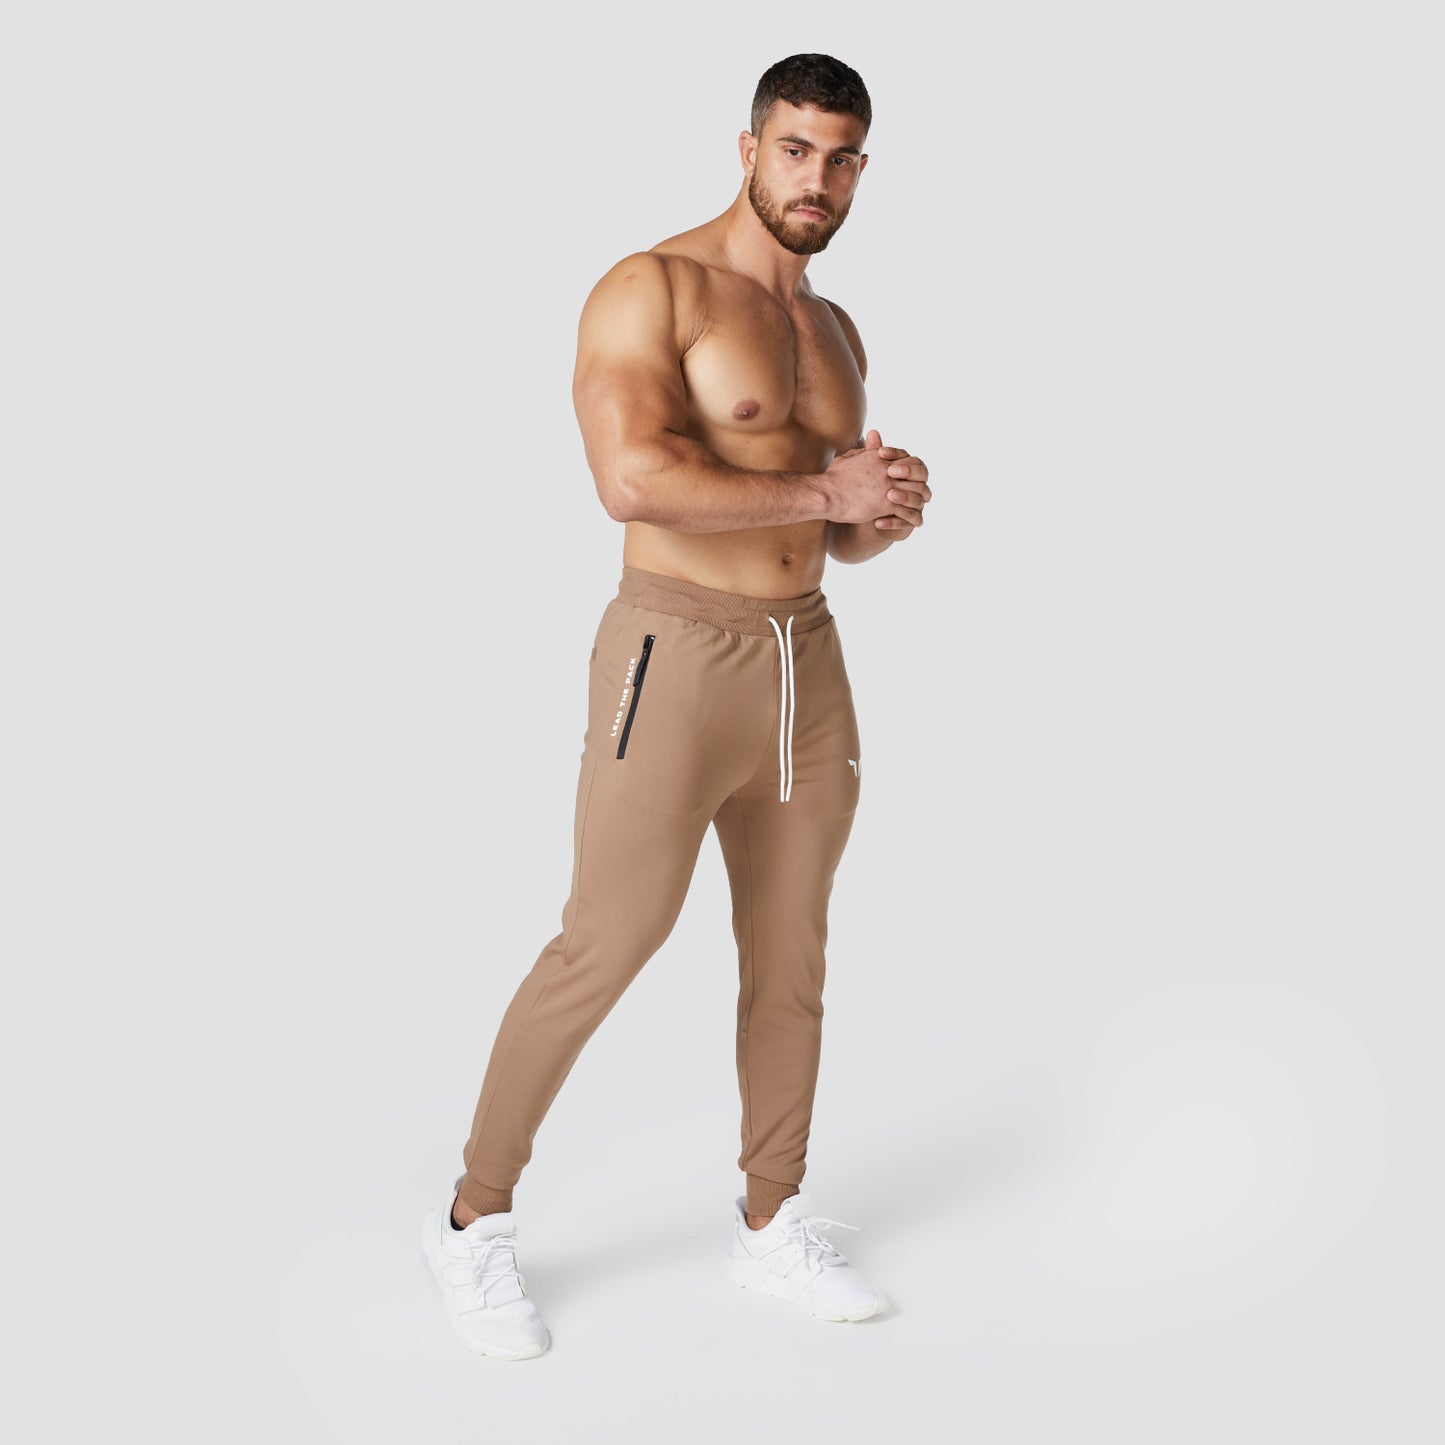 squatwolf-gym-wear-statement-classic-joggers-brown-workout-pants-for-men